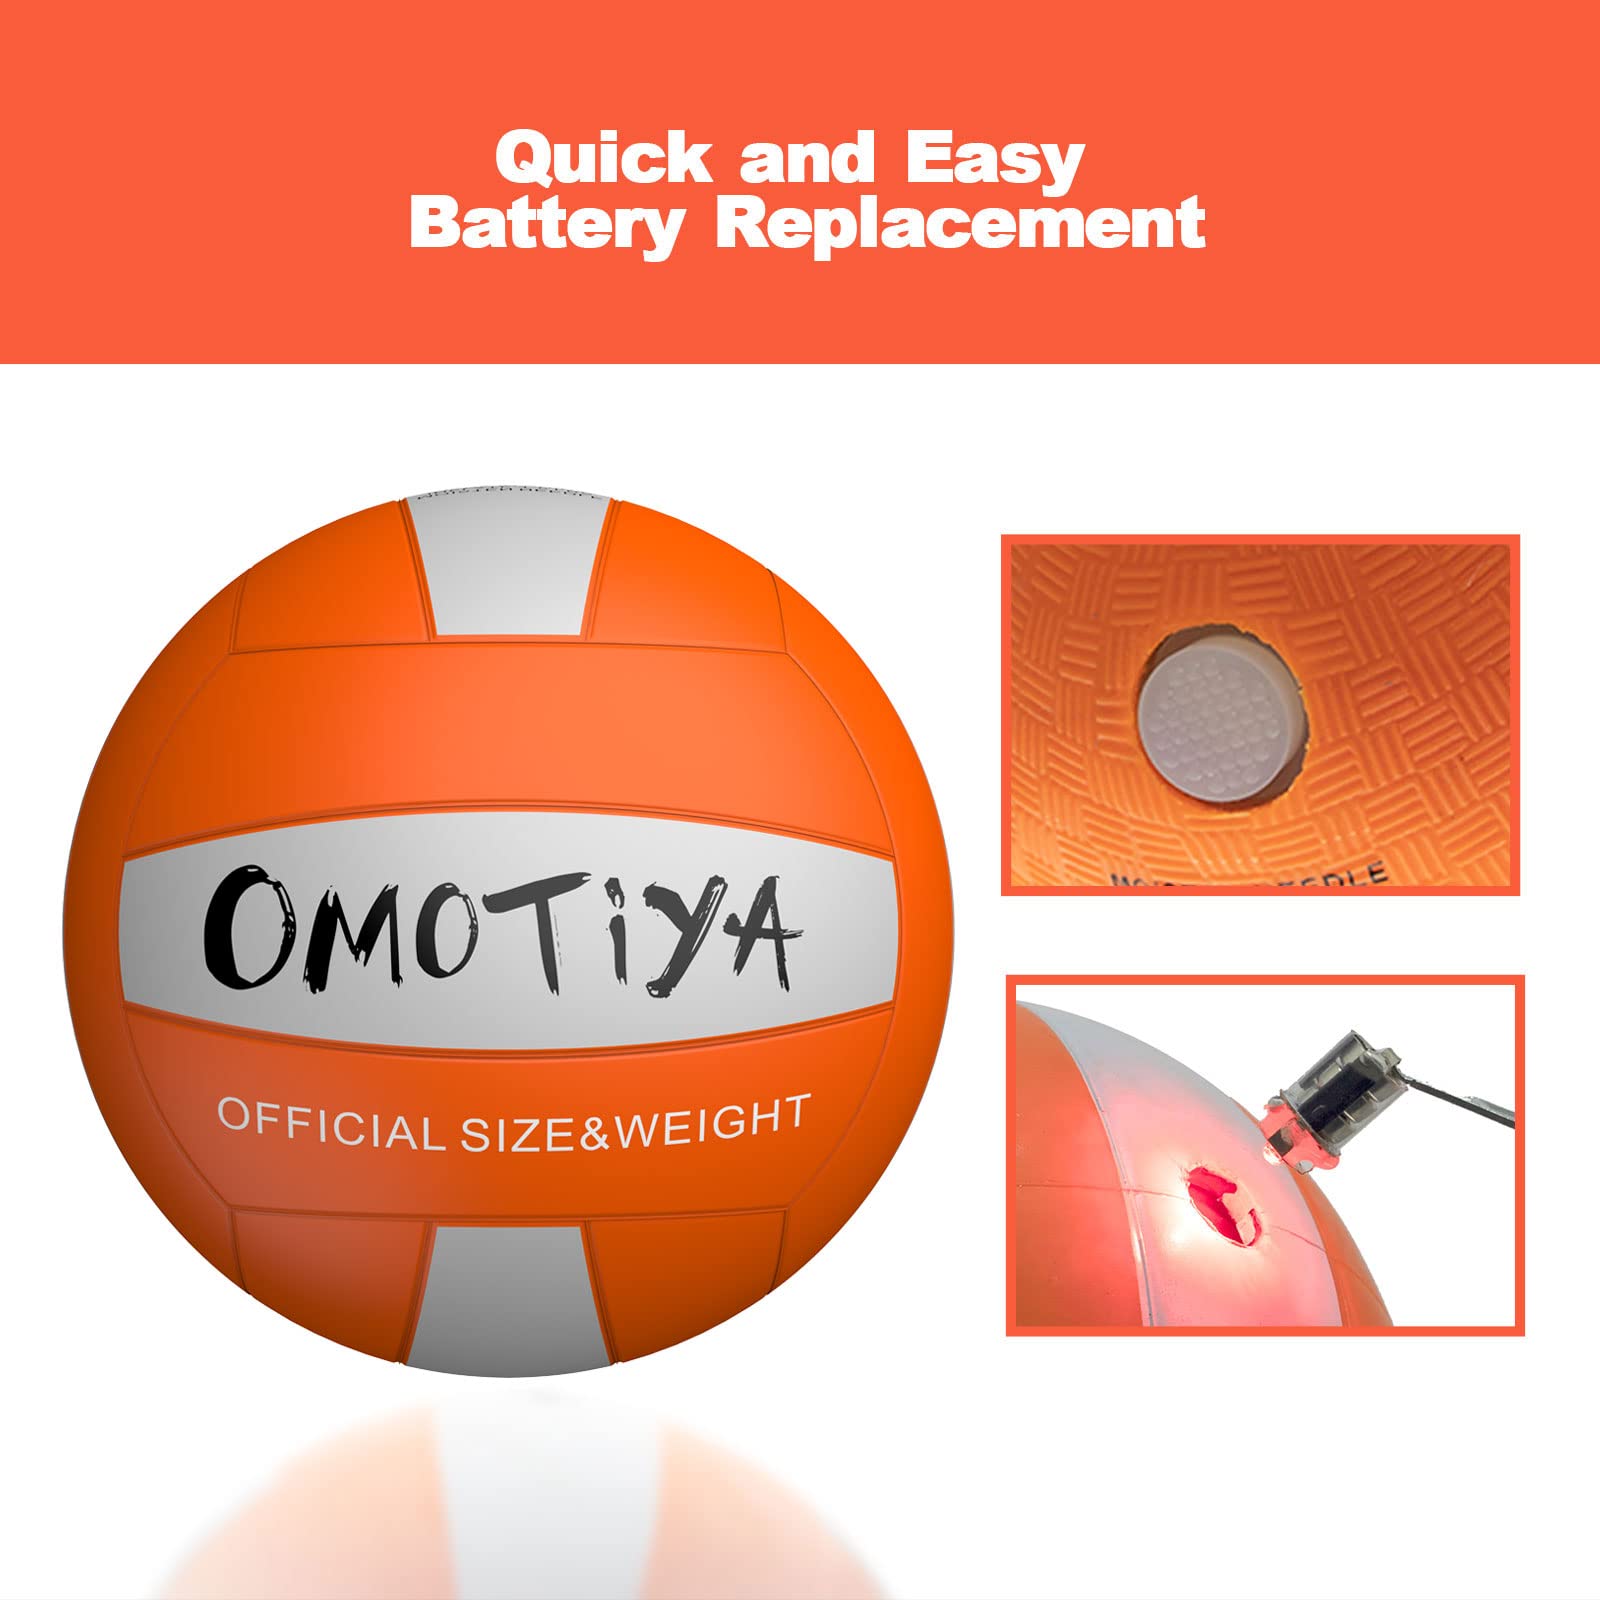 OMOTIYA Glow in The Dark Volleyball, LED Light Up Volleyball, Outdoor Volleyball Gifts for Boys and Girls, Night Glowing Ball, Soft Volleyballs Gifts Ideas for Age 8, 9, 10, 11, 12, 13+ Kids Teens